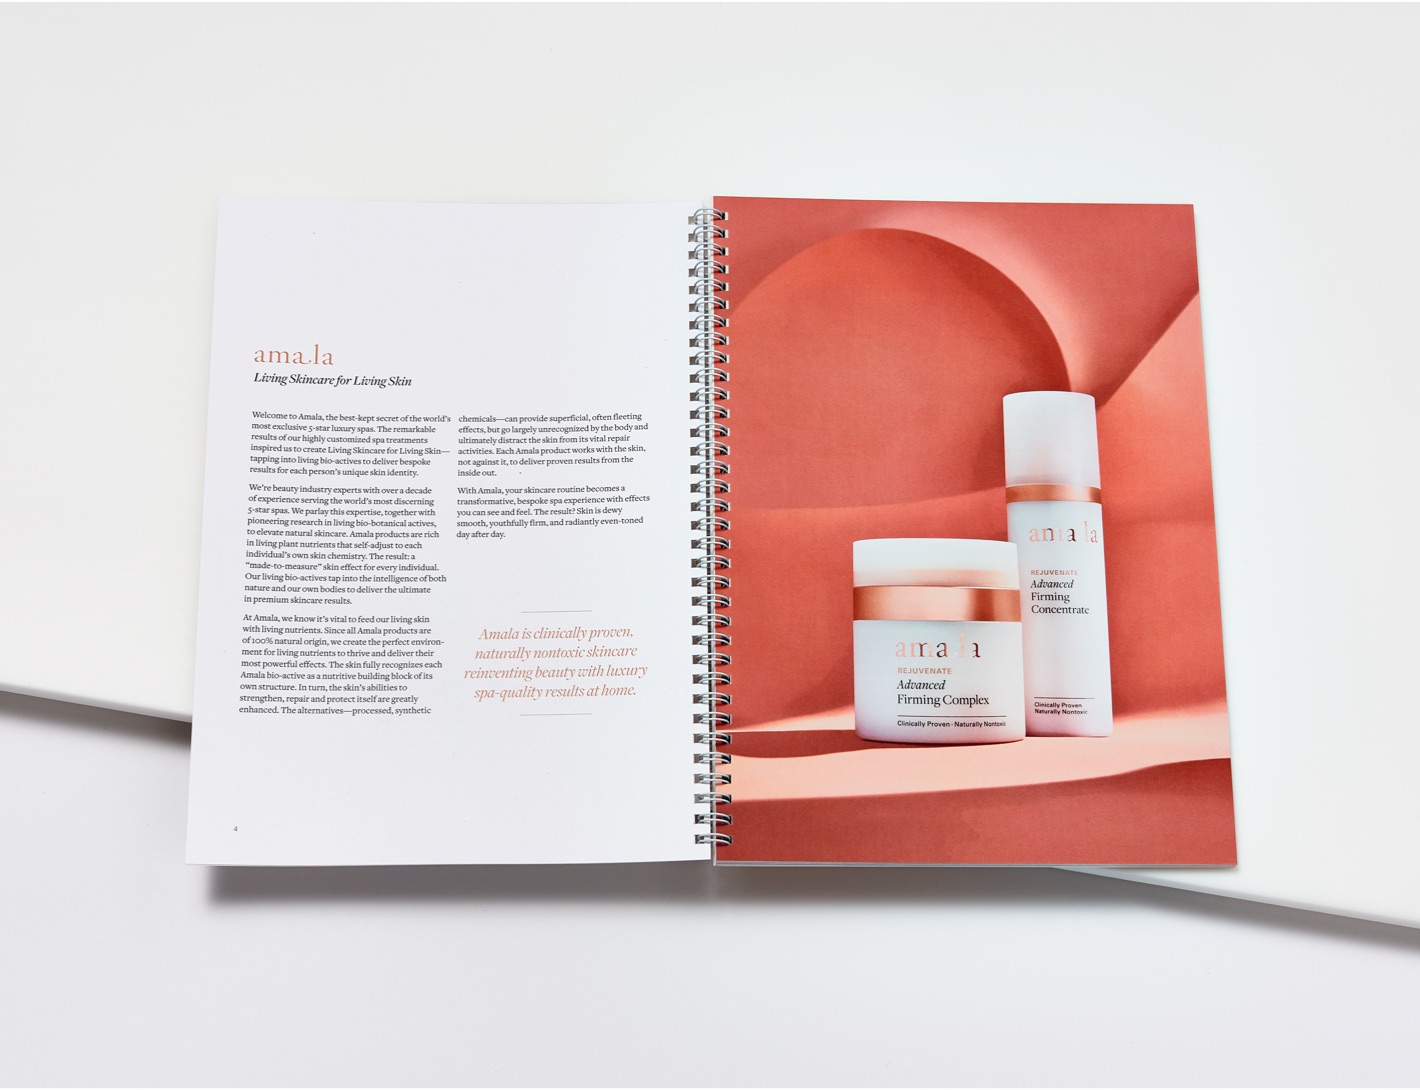 Amala training manual spread featuring Advanced Firming Complex and Advanced Firming Concentrate